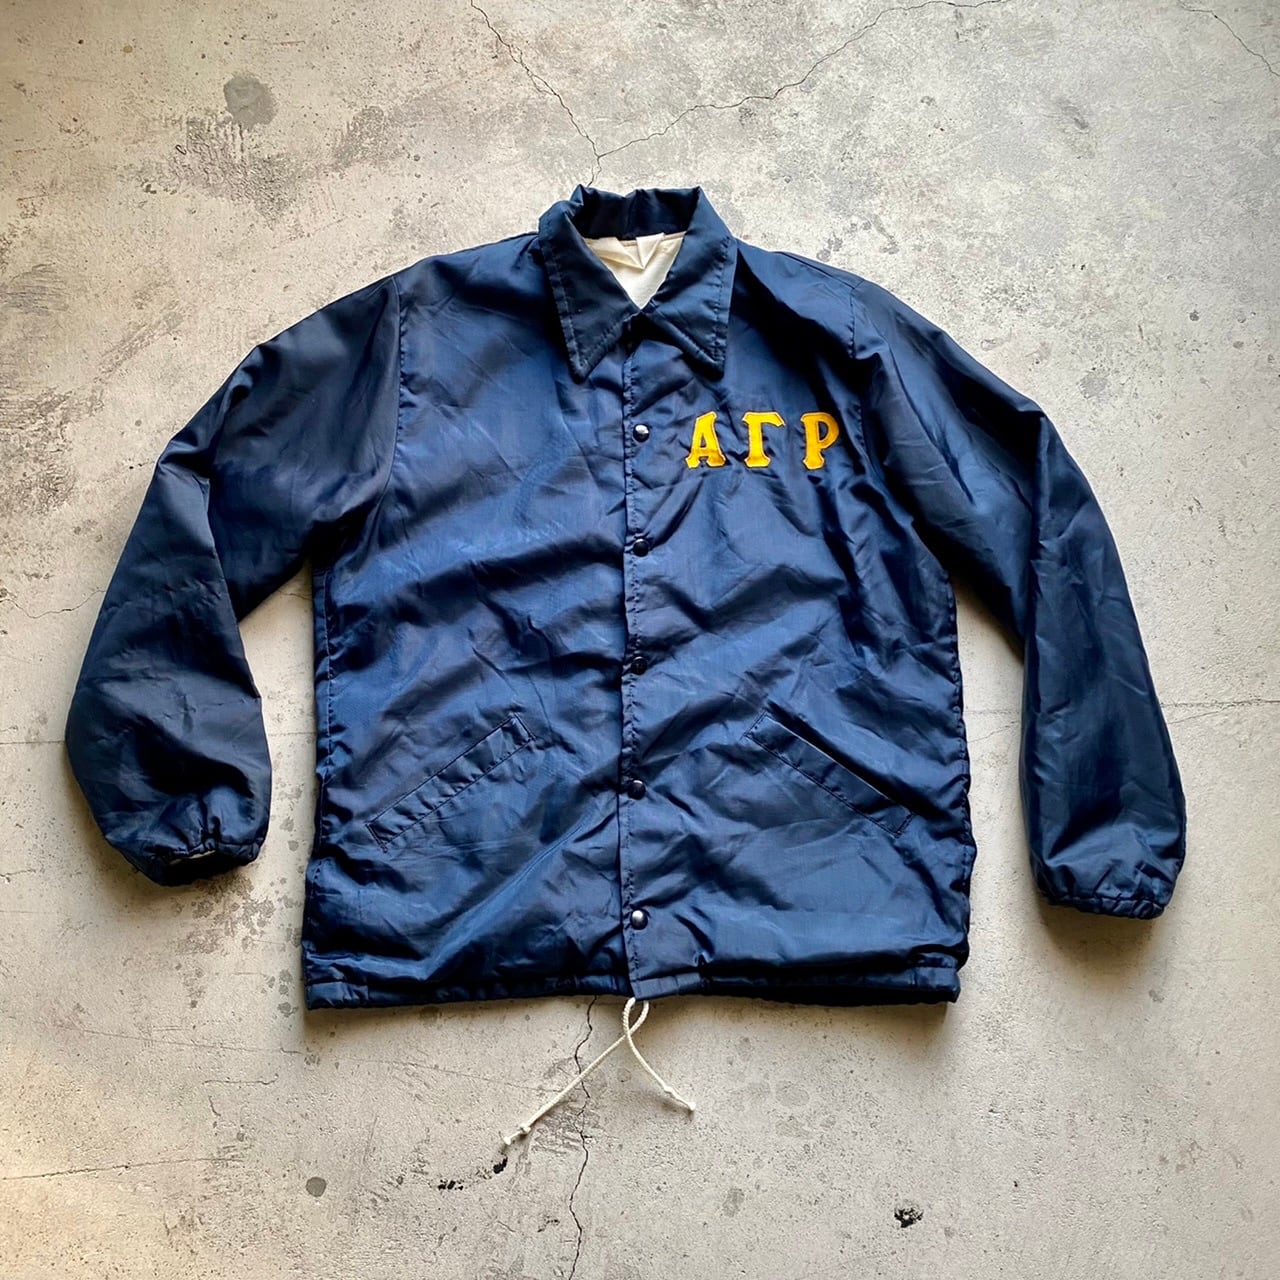 used vintage 60〜70s ヴィンテージ 古着 カレッジ コーチ ジャケット アメリカ古着 COACH JACKET |  magazines webshop powered by BASE